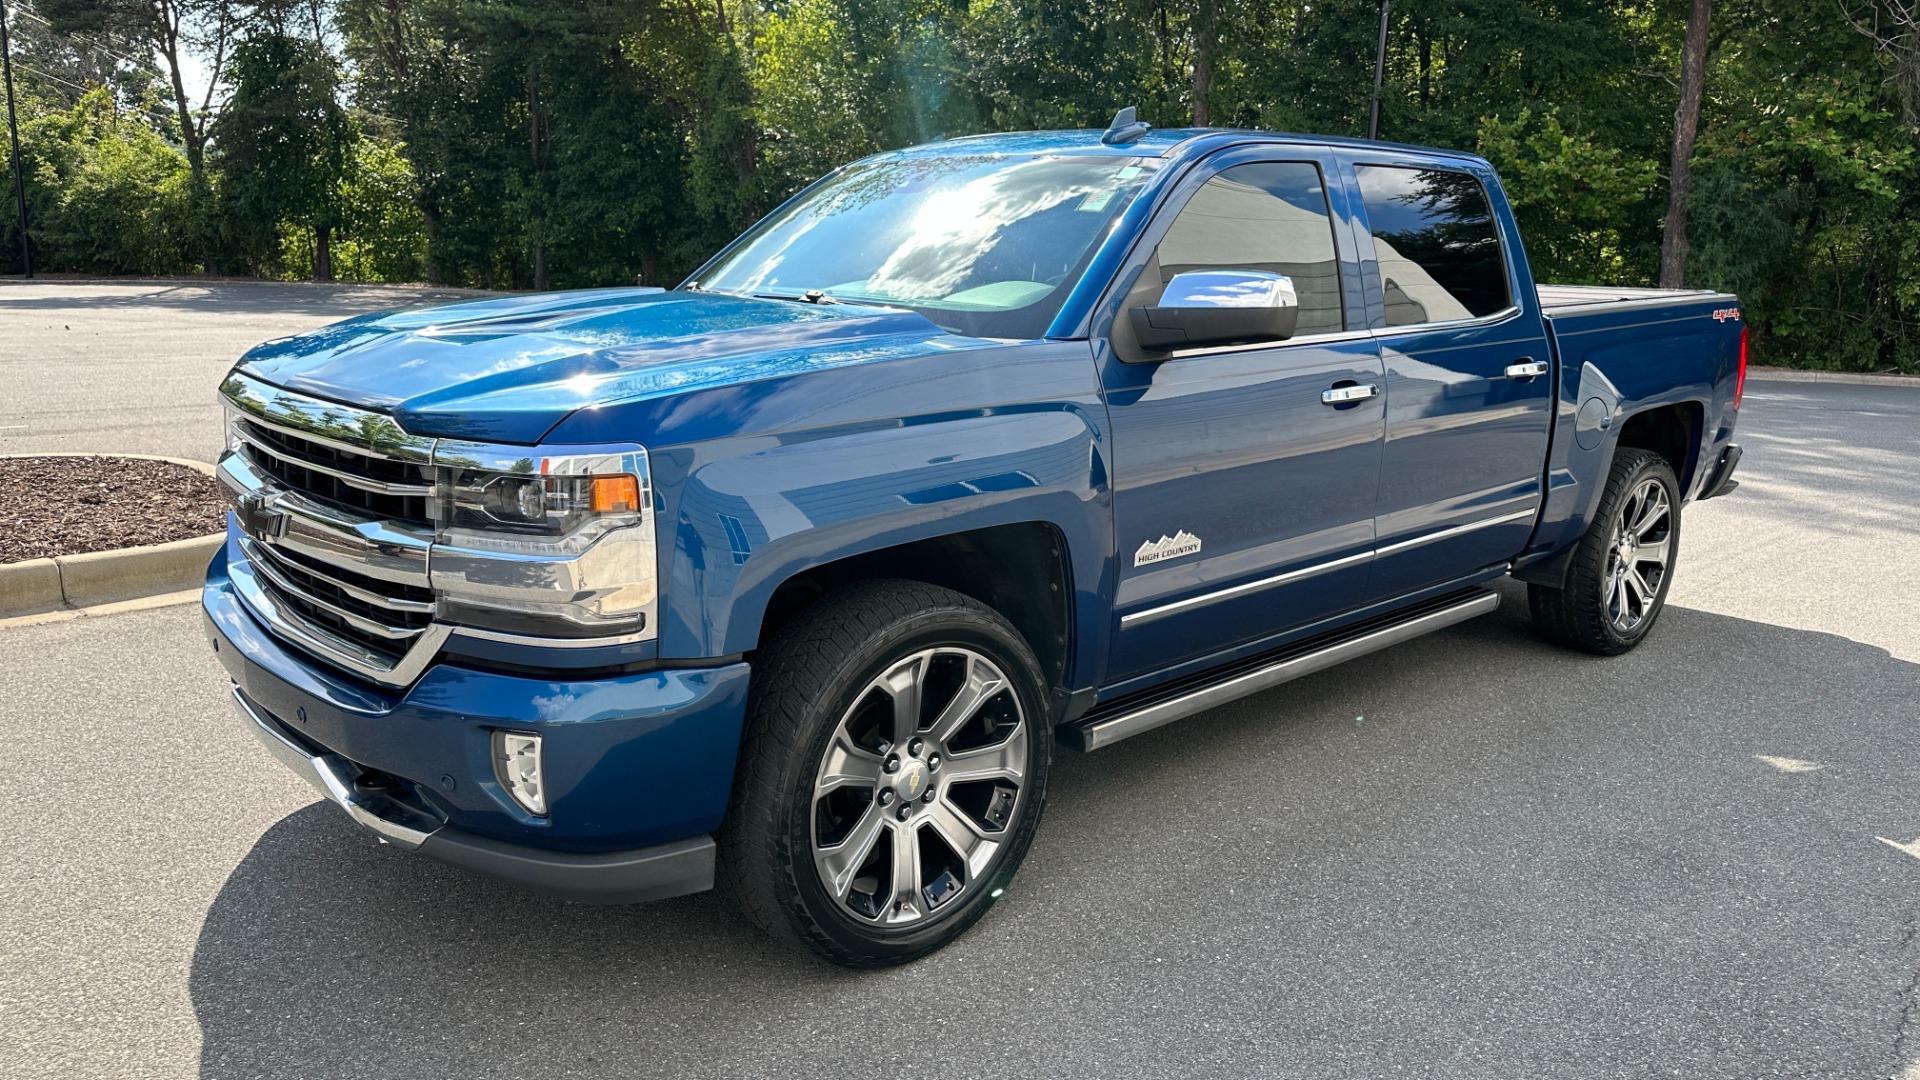 Used 2017 Chevrolet Silverado 1500 High Country 6.2L / 22IN WHEELS / SUNROOF / POWER RUNNING BOARDS for sale Sold at Formula Imports in Charlotte NC 28227 2